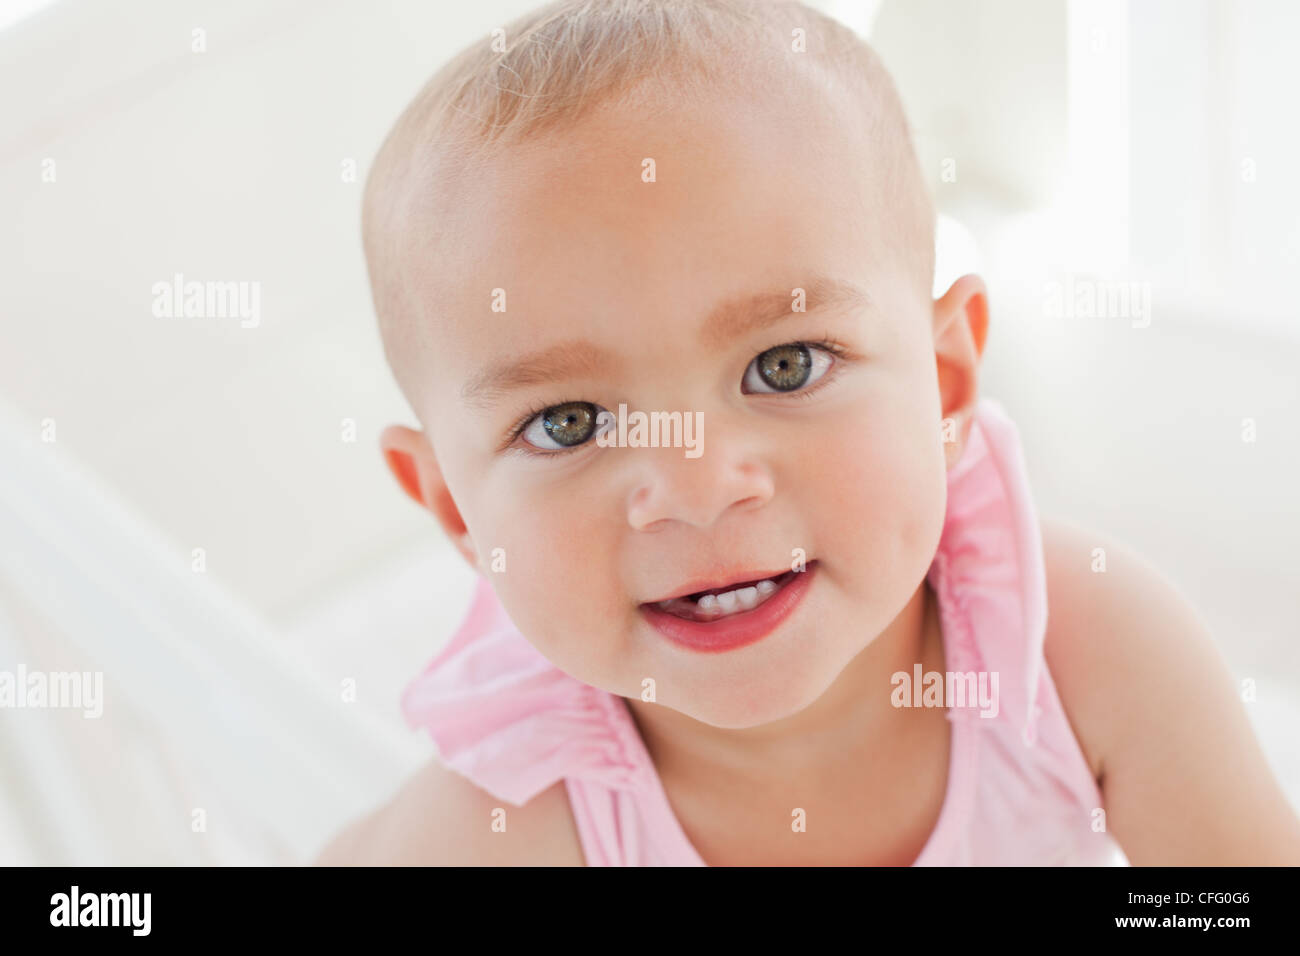 Lovely baby looking at the camera while opening her mouth Stock Photo